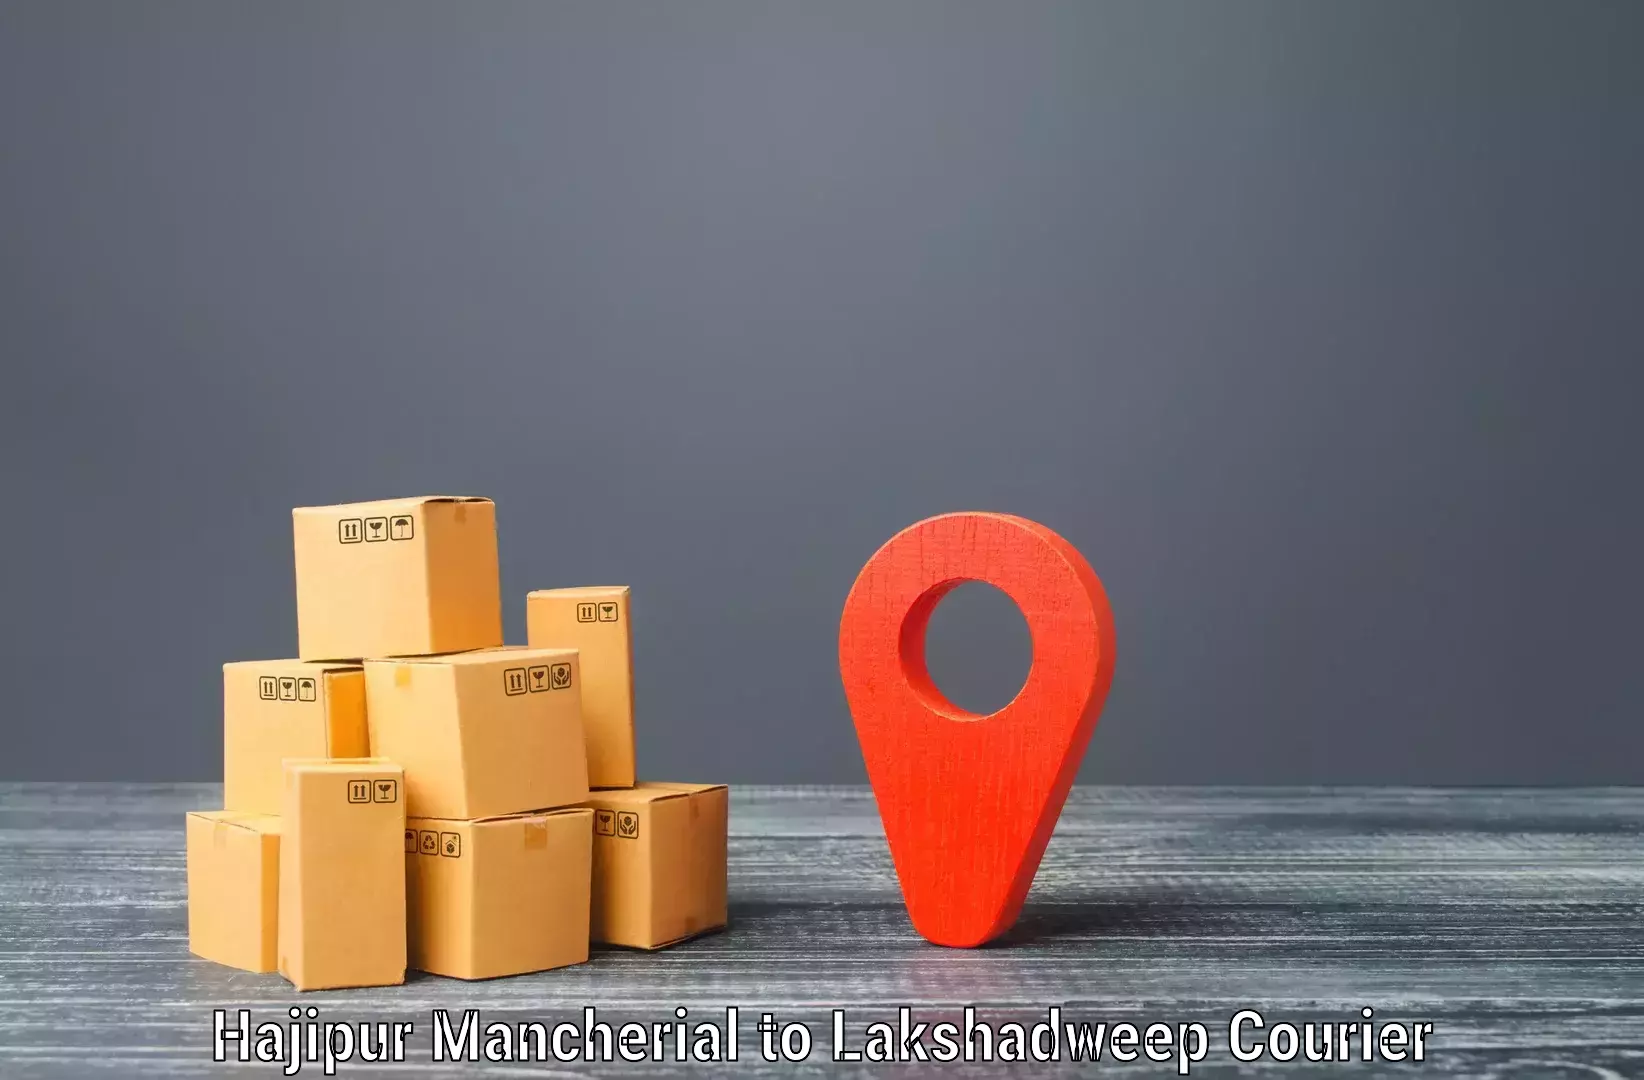 Local courier options Hajipur Mancherial to Lakshadweep